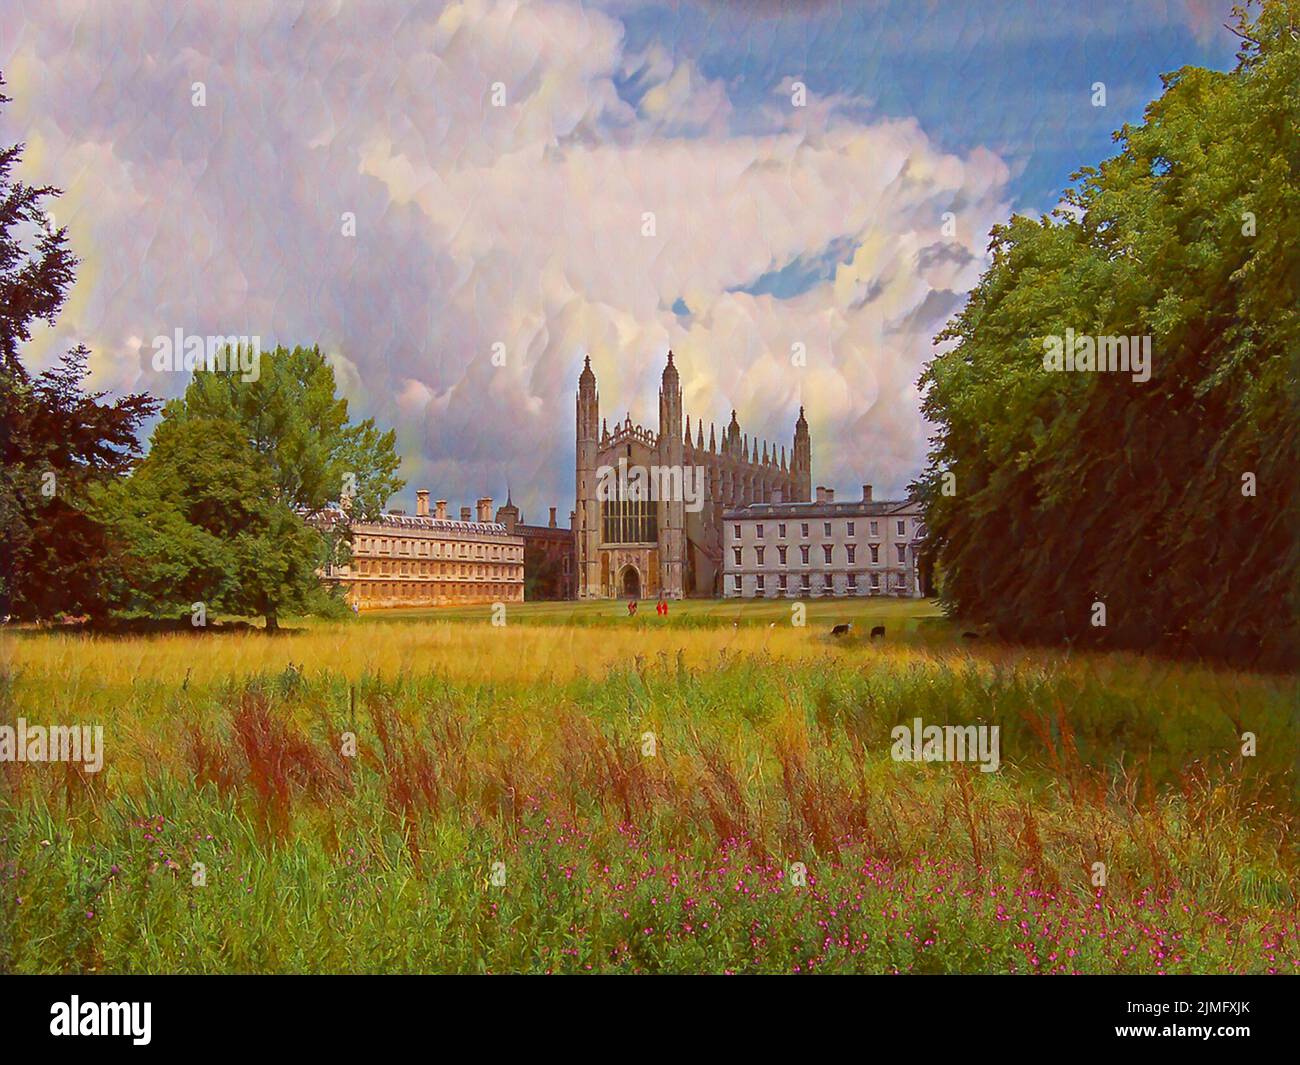 River Cam view of King's College Chapel in Cambridge, England. Edited to look like a painting, with fluffy clouds, green trees, and tall grass growing Stock Photo